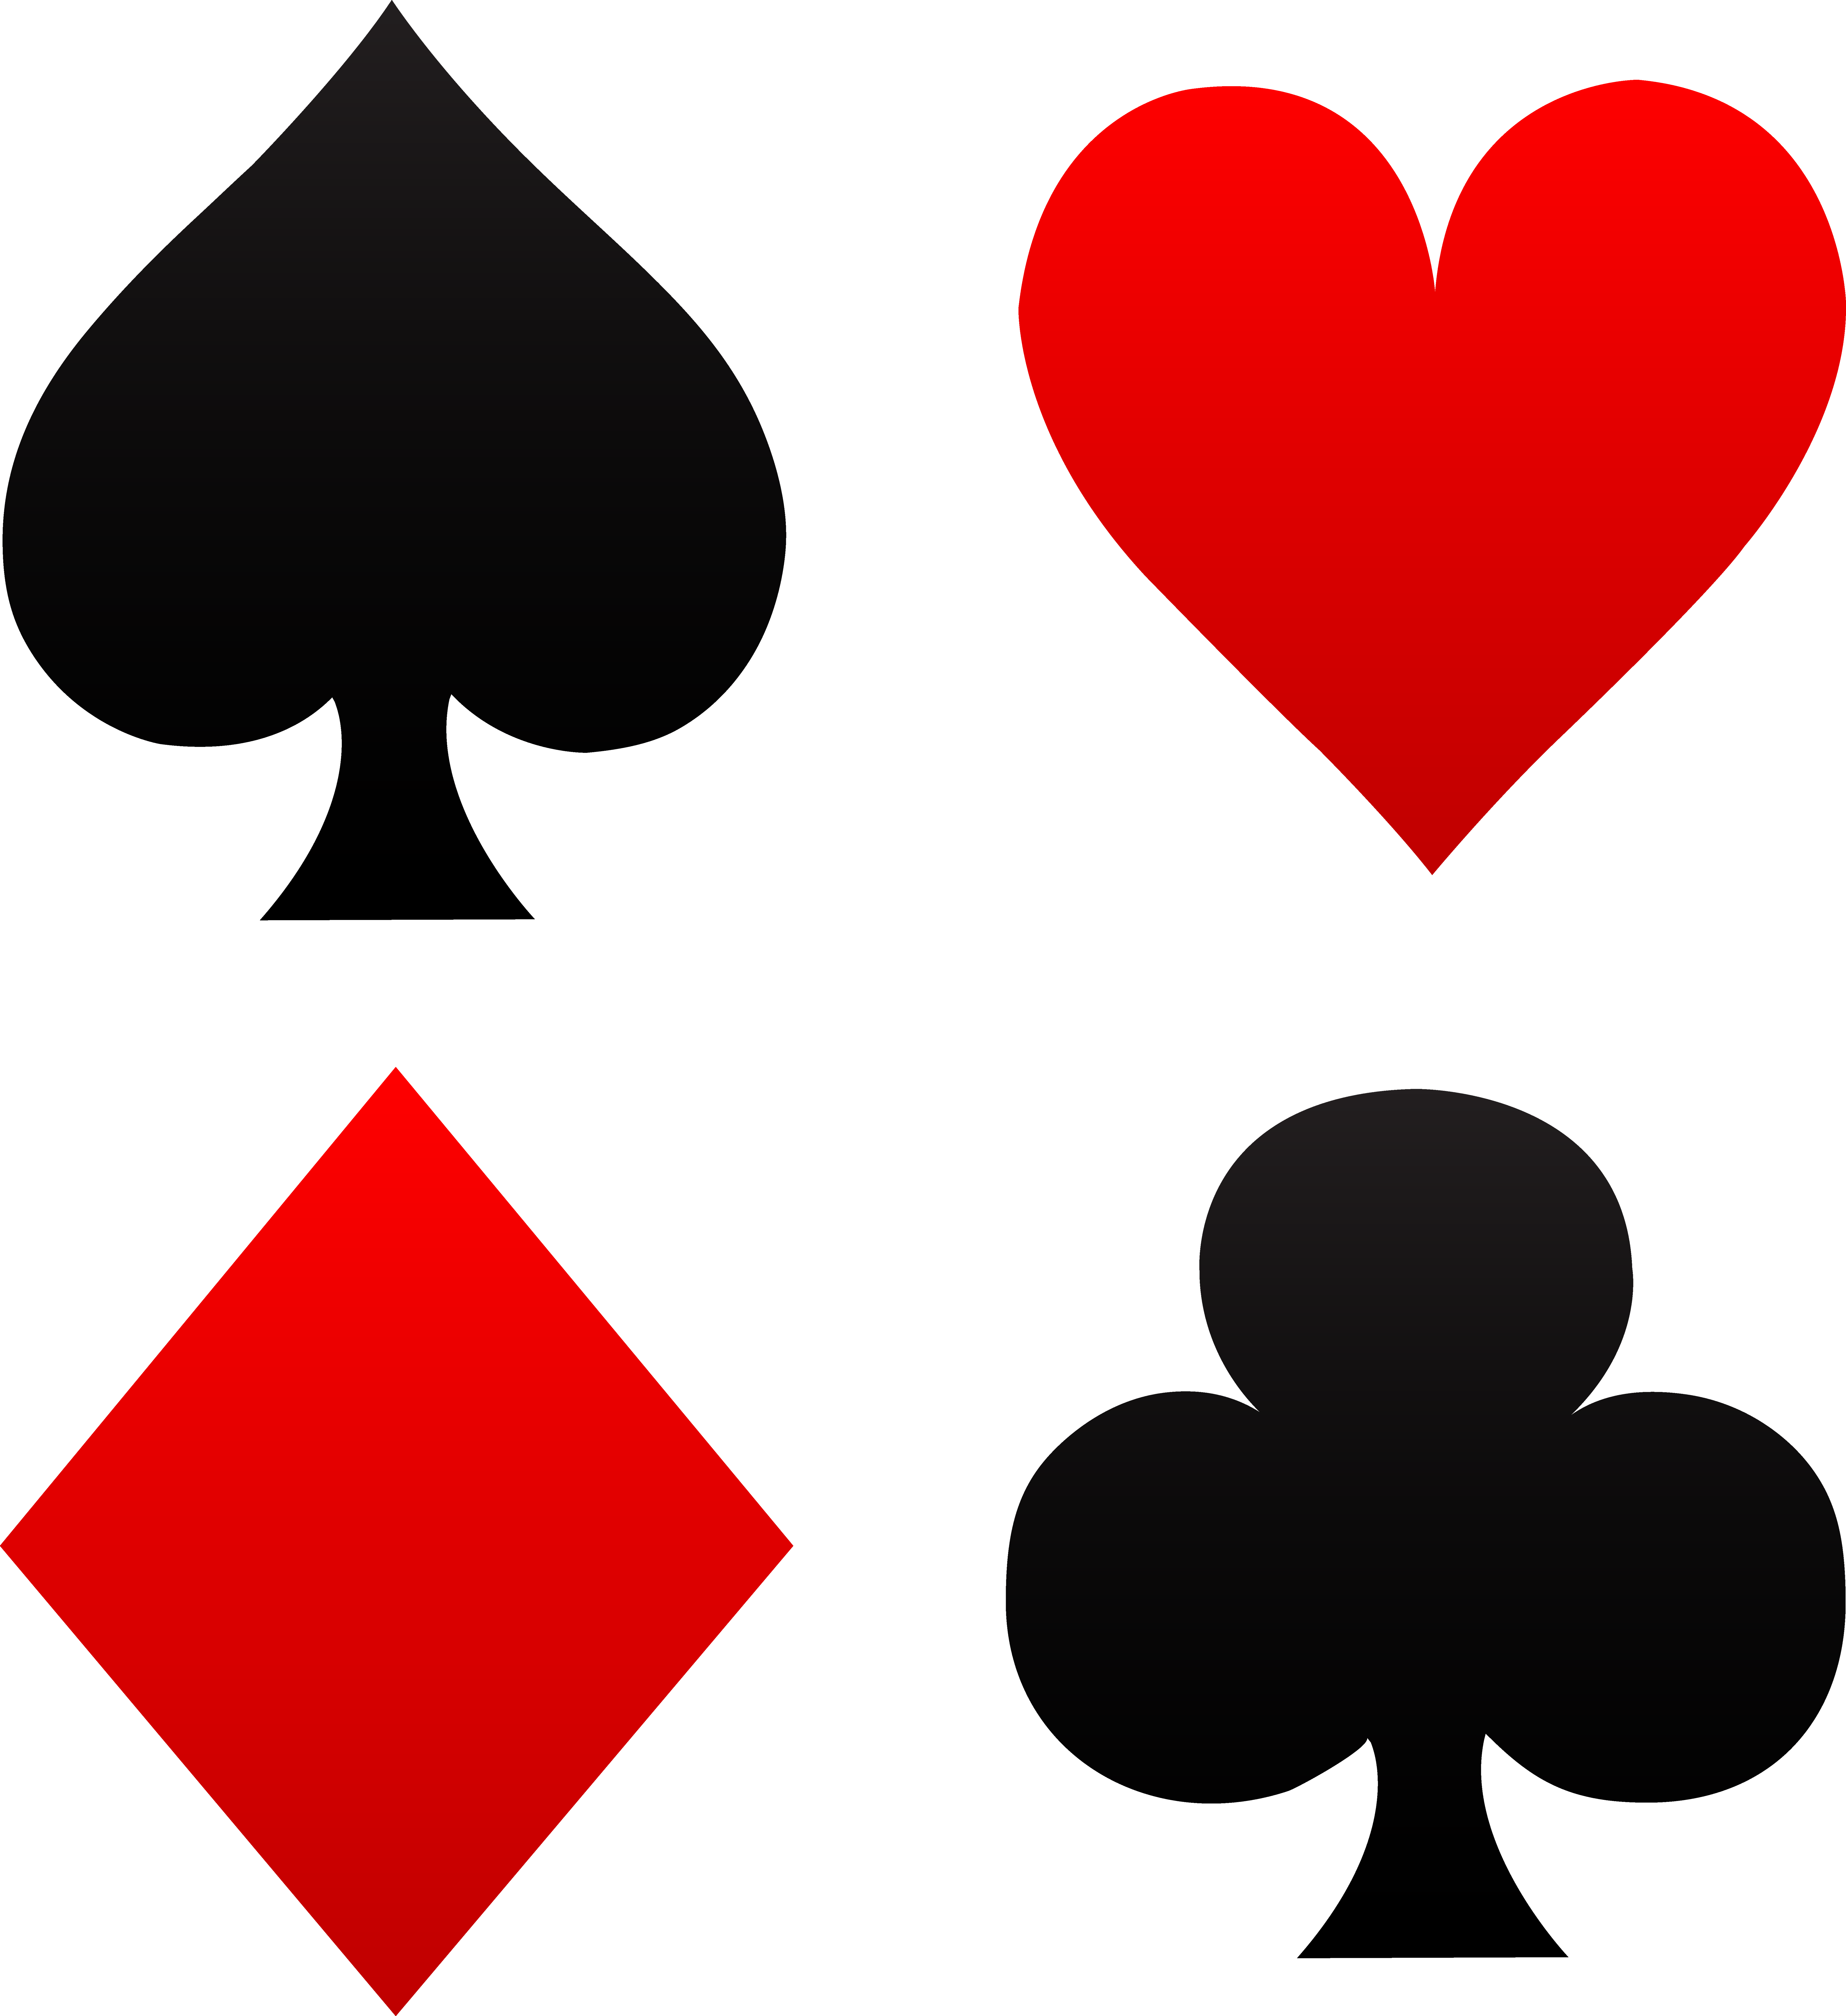 Download House Symbol Suit Of Cards Playing Card Hq Png Image Freepngimg